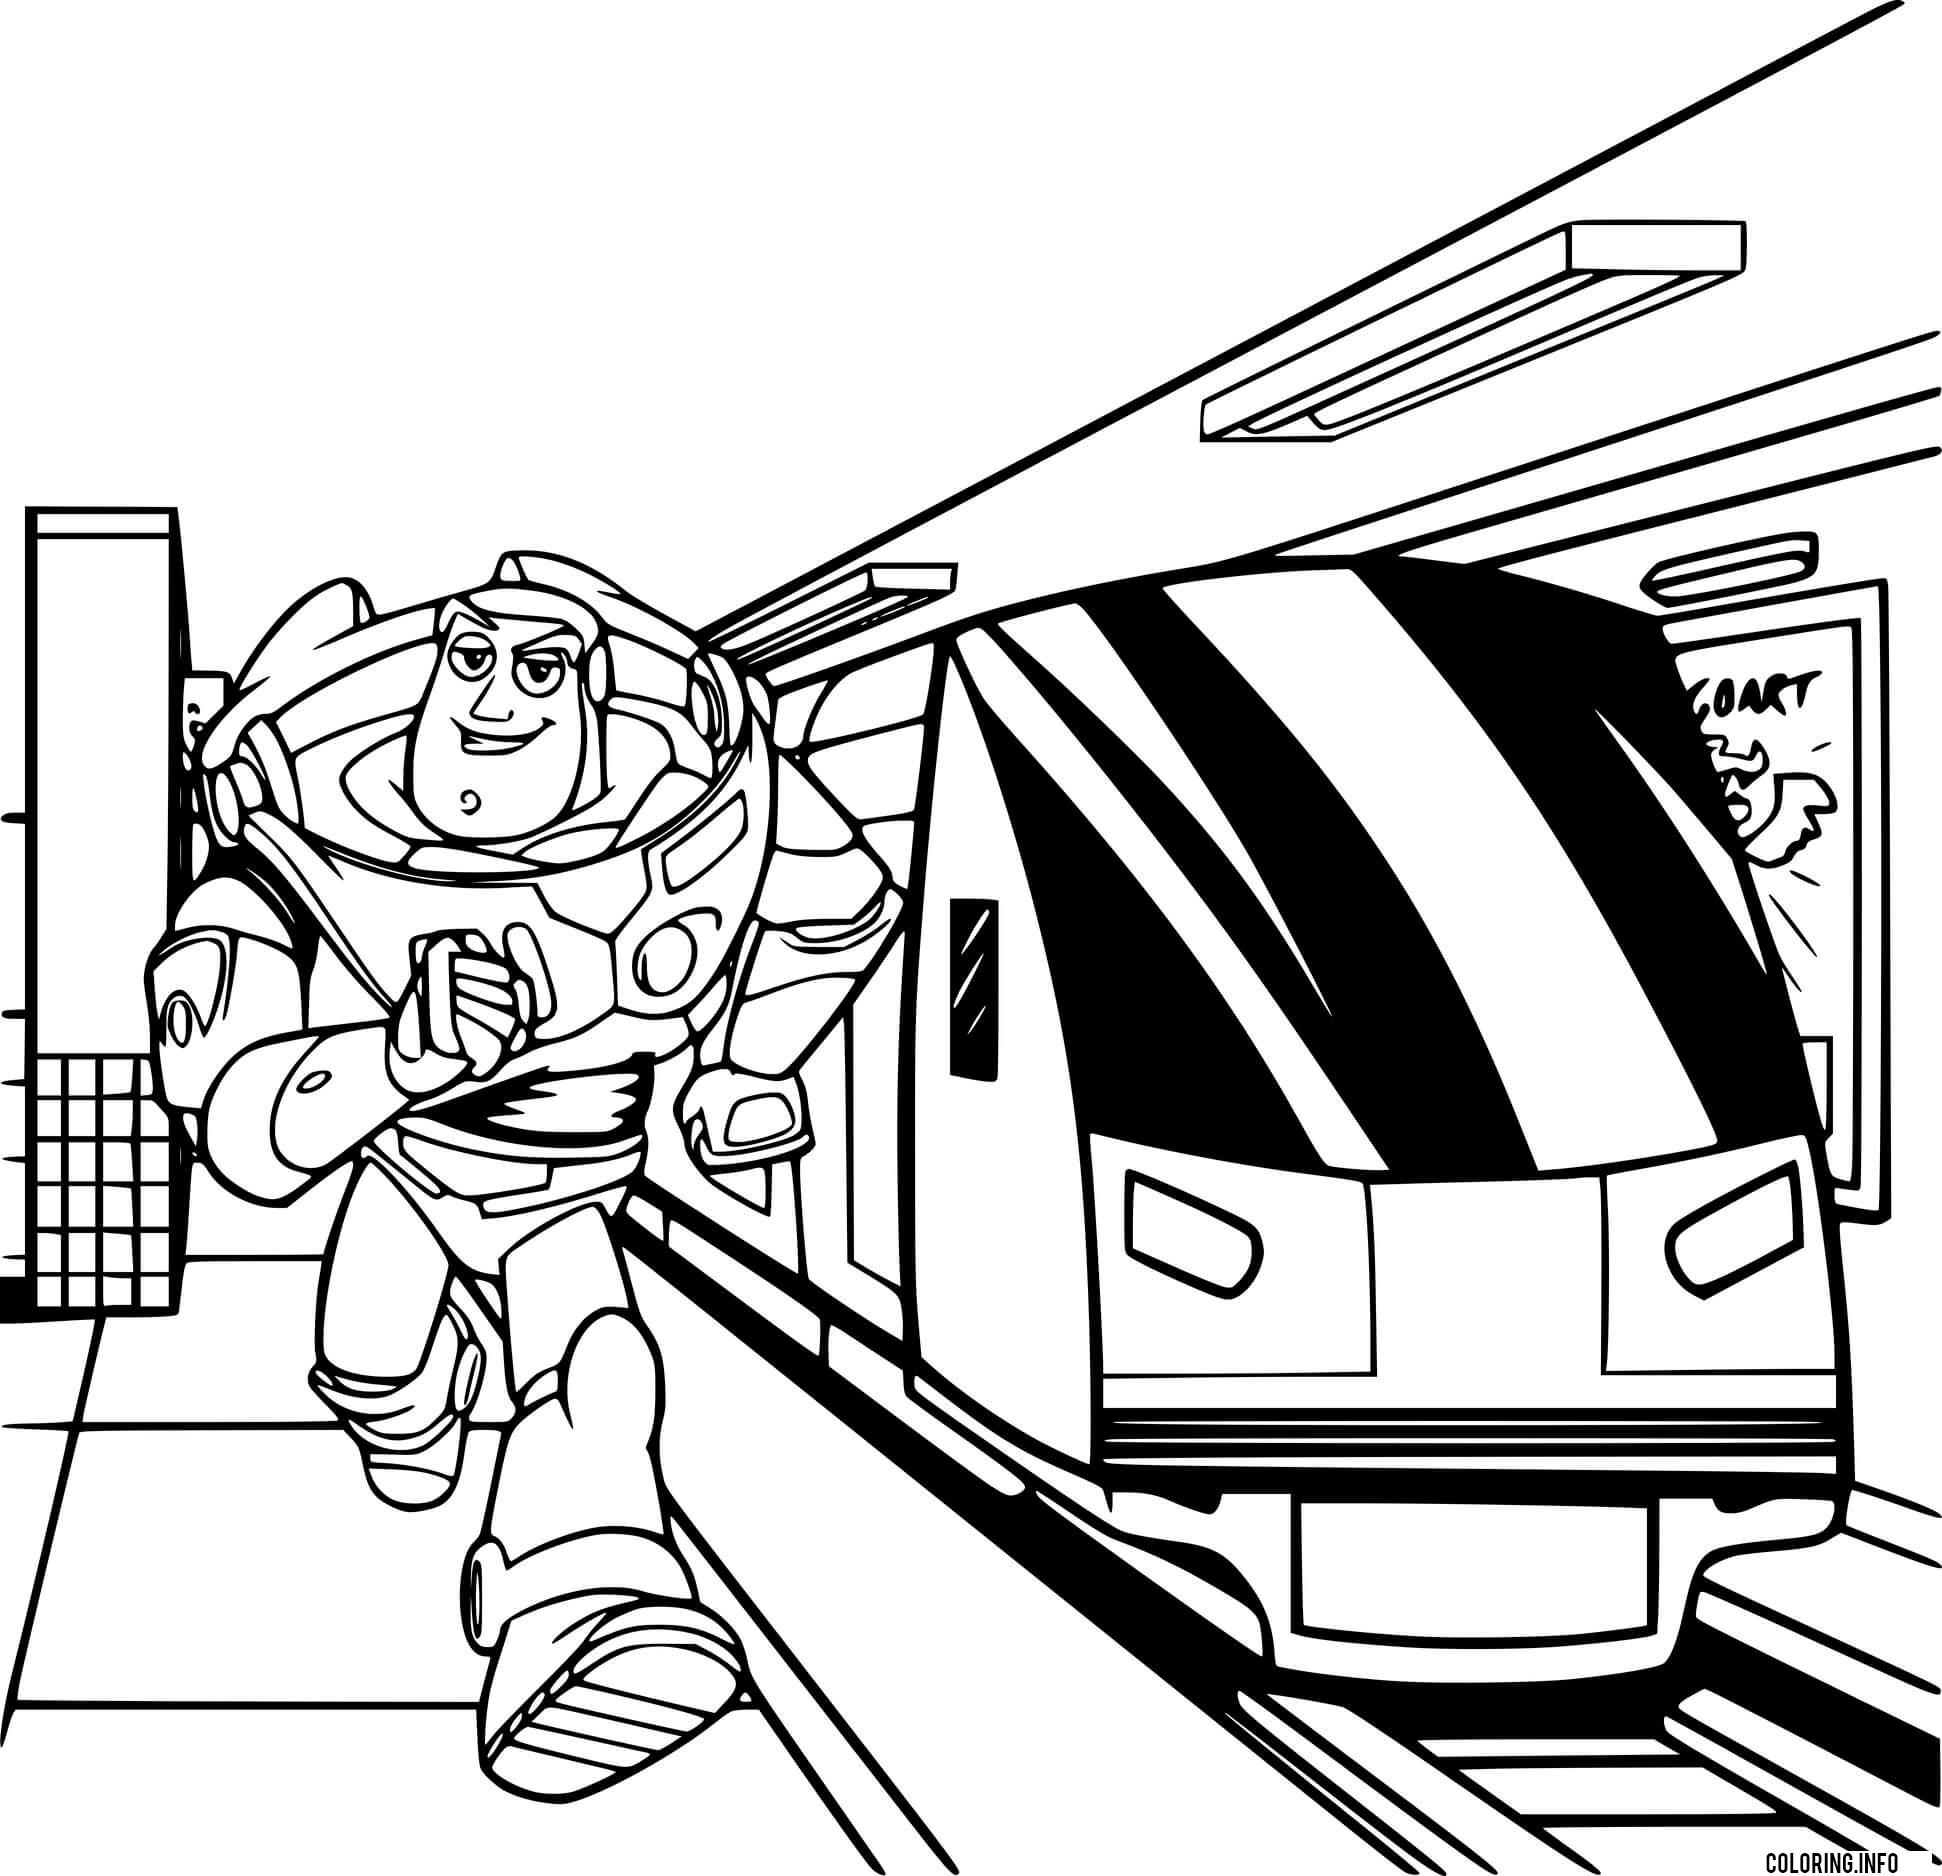 Buzz Lightyear At The Subway Station coloring